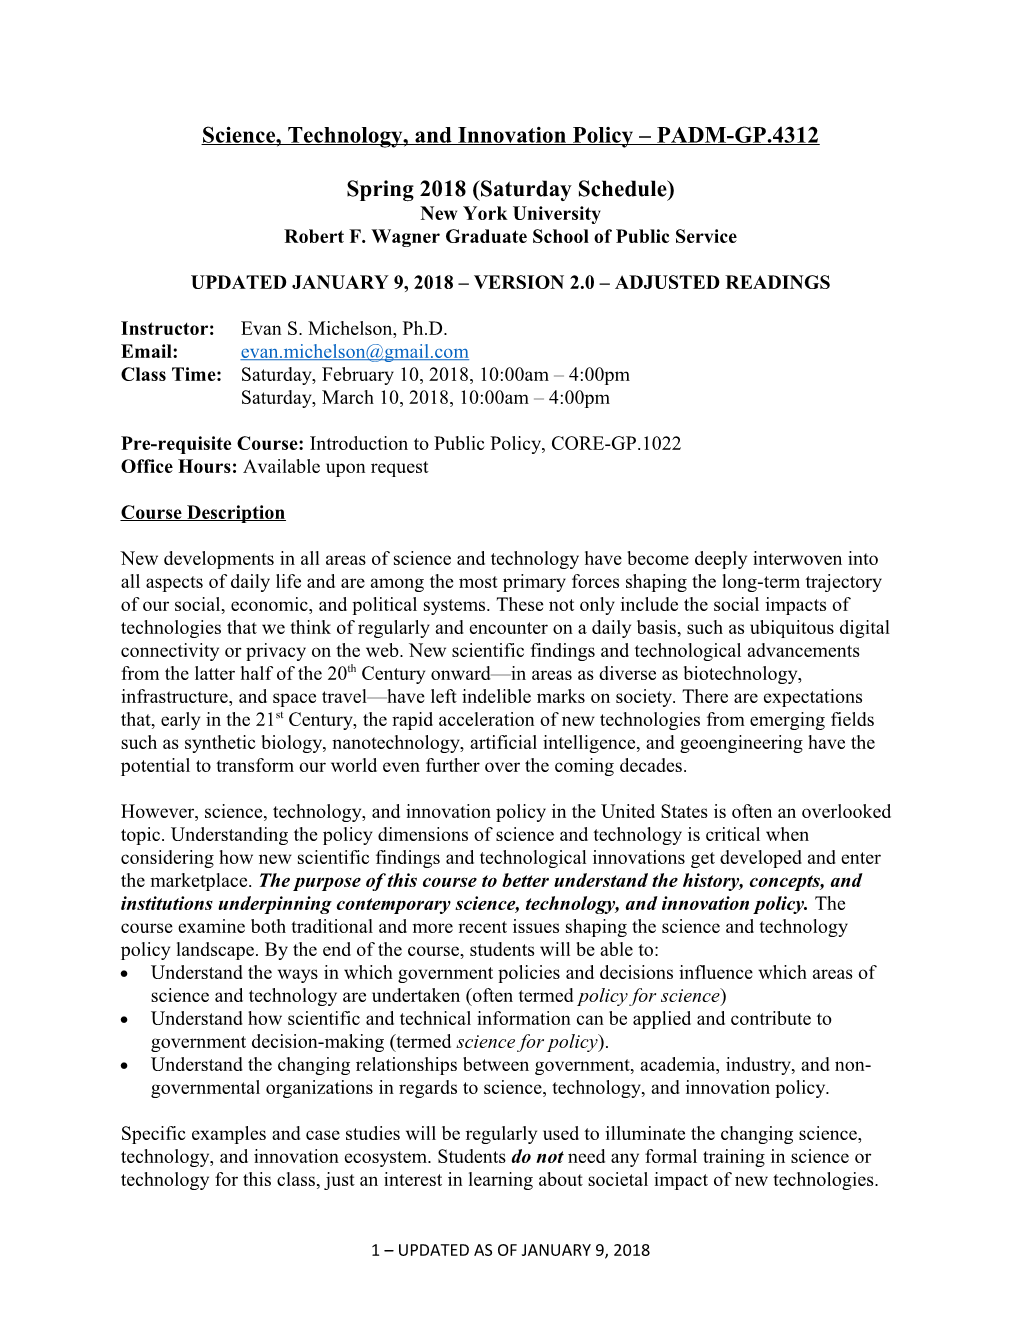 Science, Technology, and Innovation Policy PADM-GP.4312